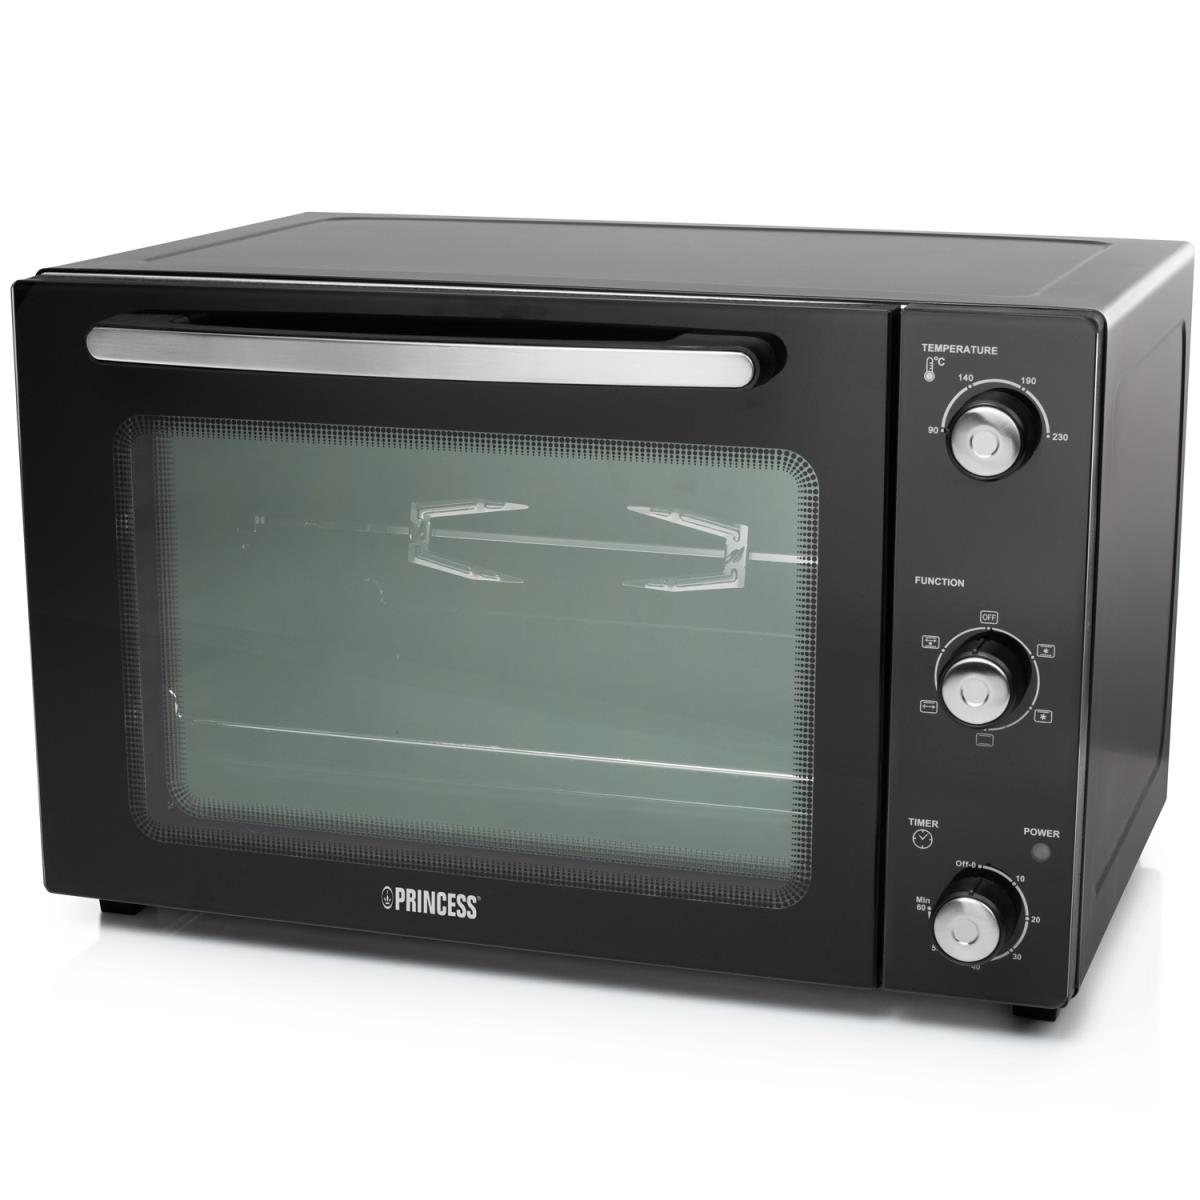 Princess: Bänkugn Convection Oven DeLuxe 45l 1800w